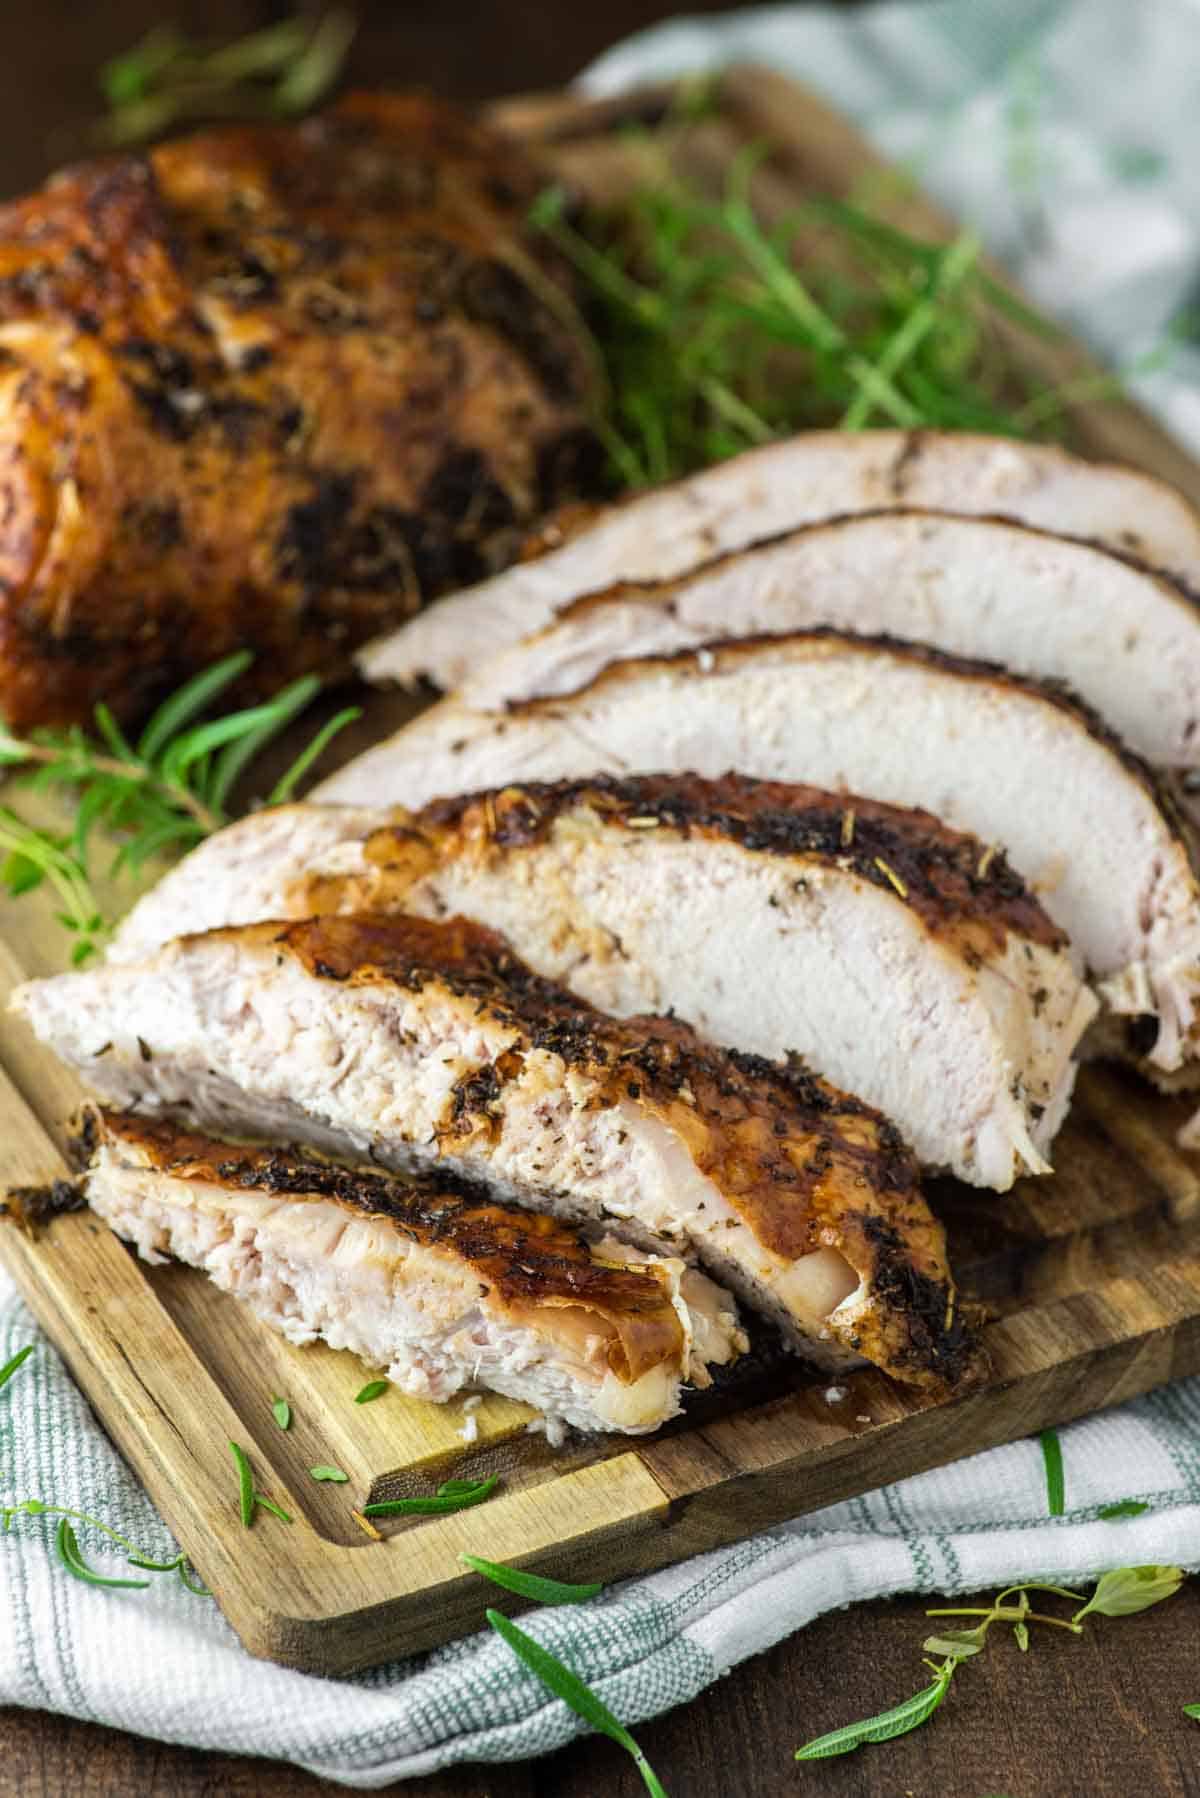 slices of smoked turkey breast on wood board